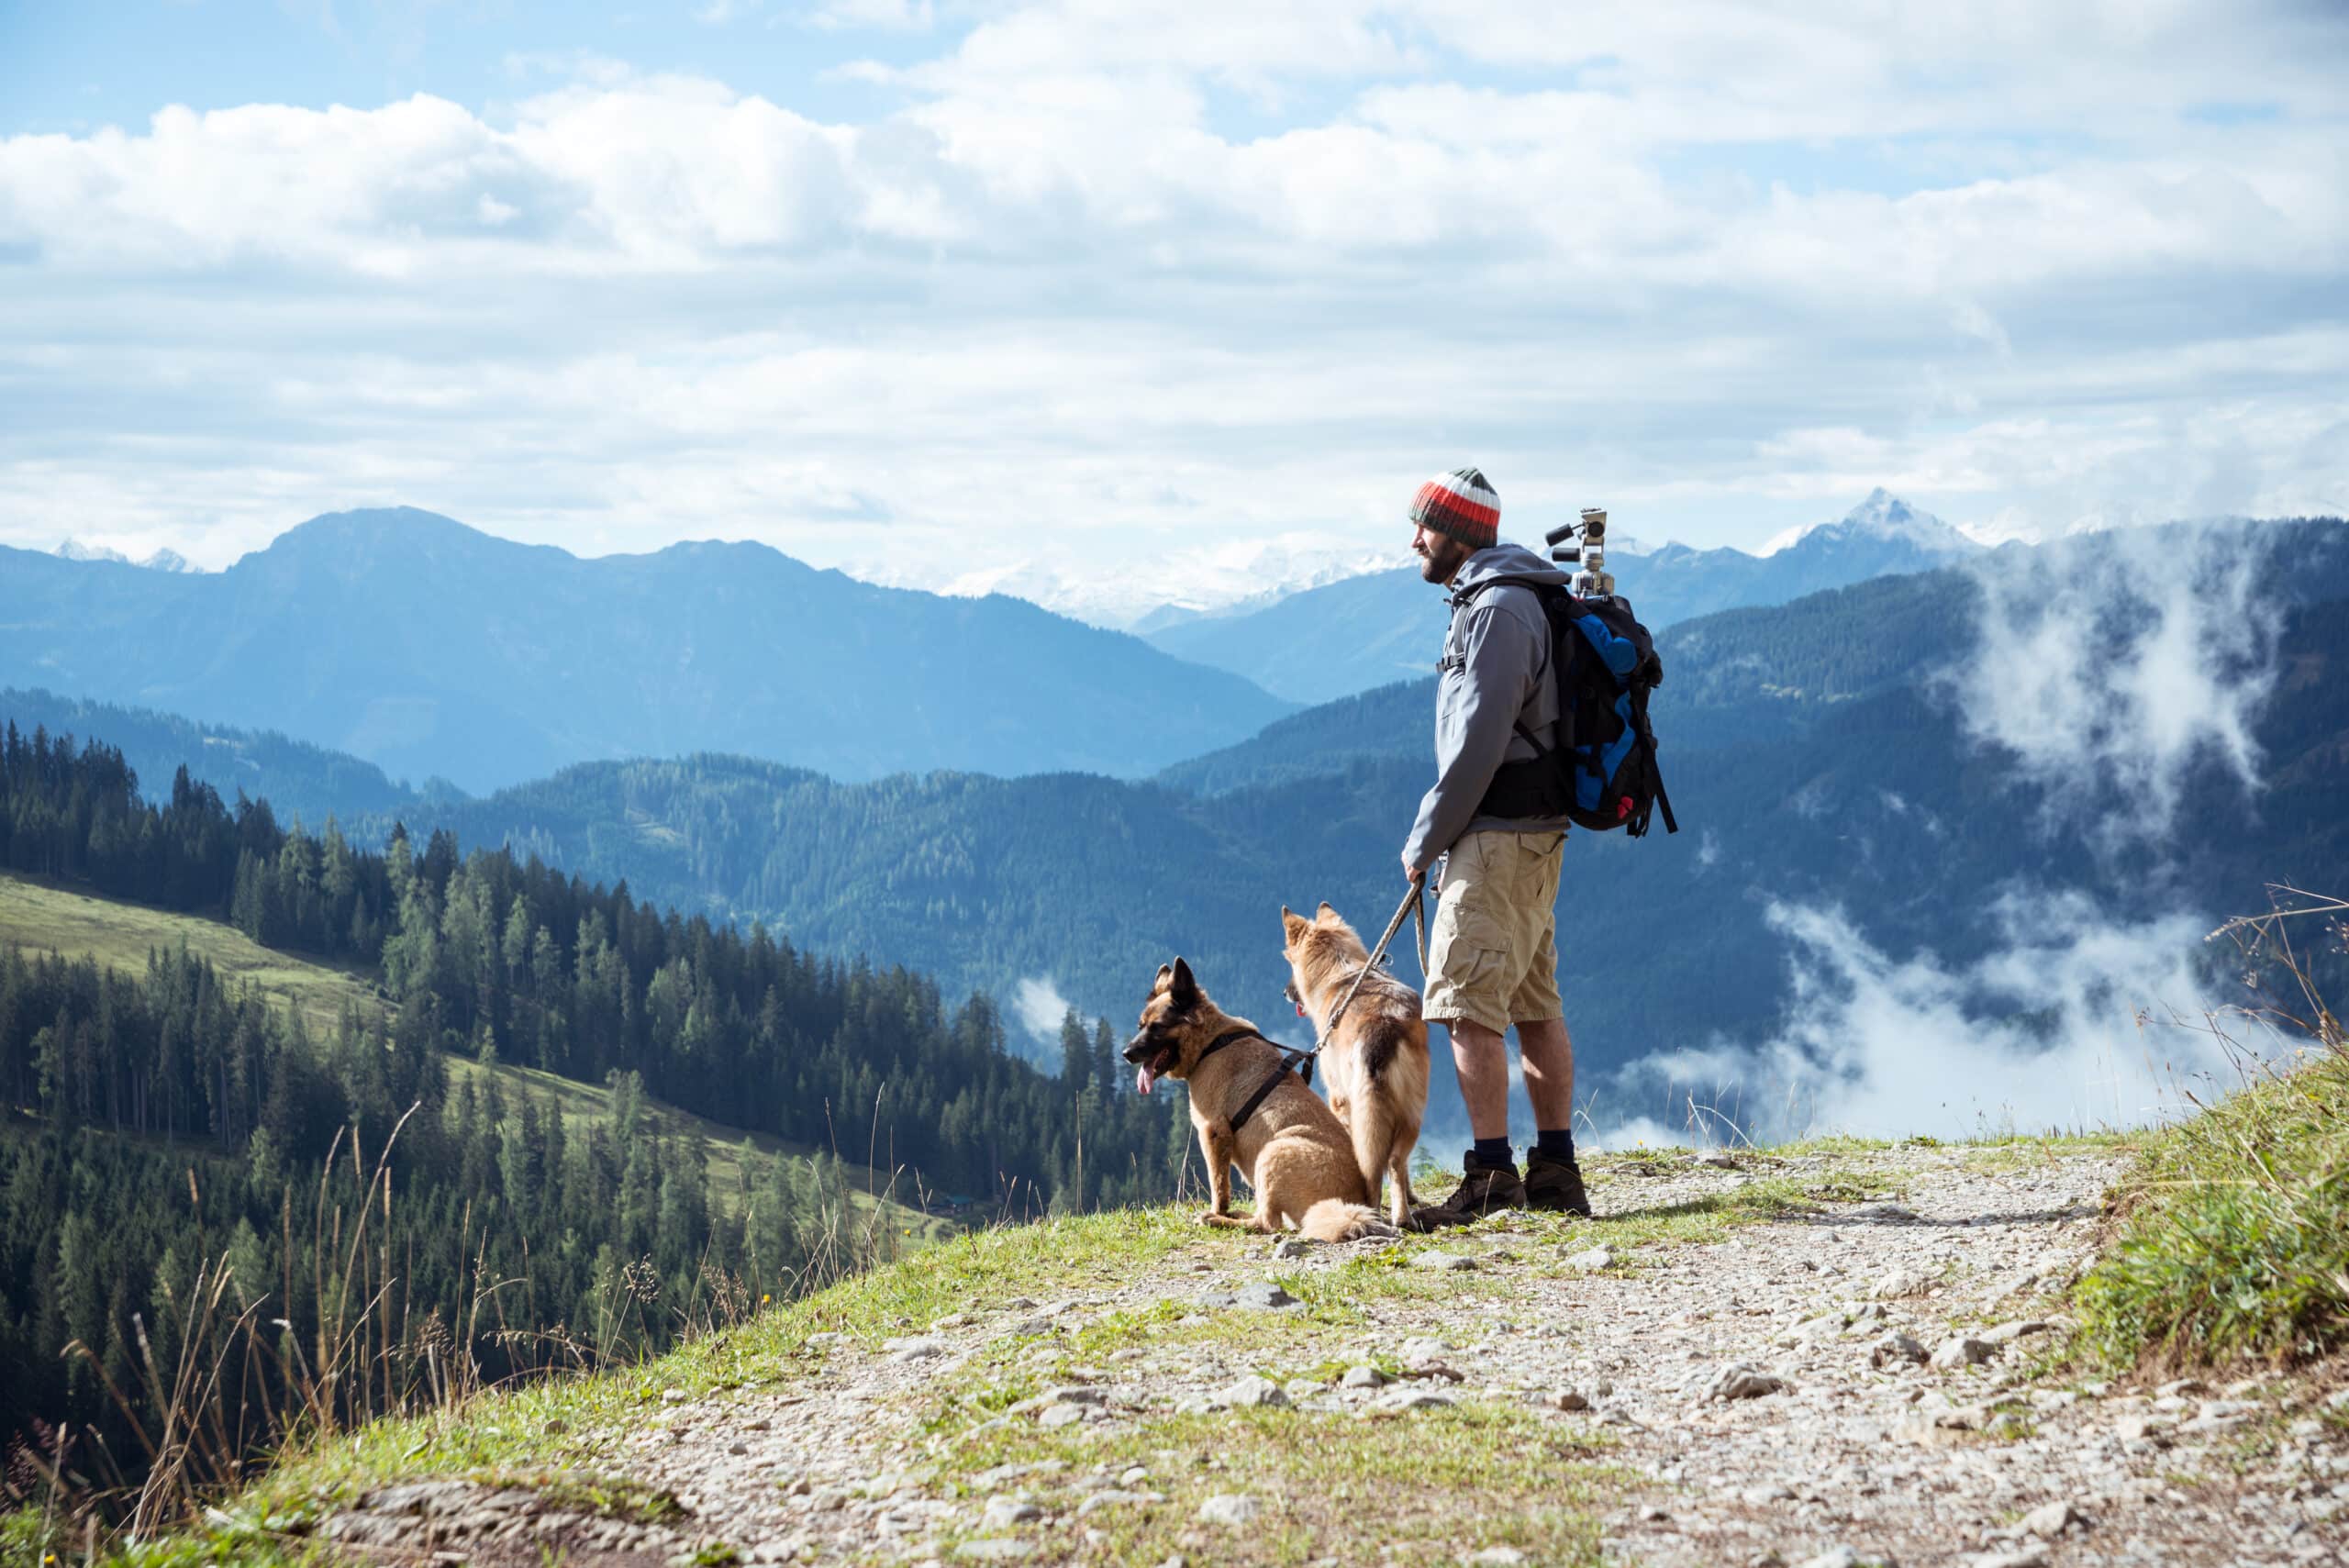 A man wearing a backpack stands on a hill overlooking mountains with two dogs